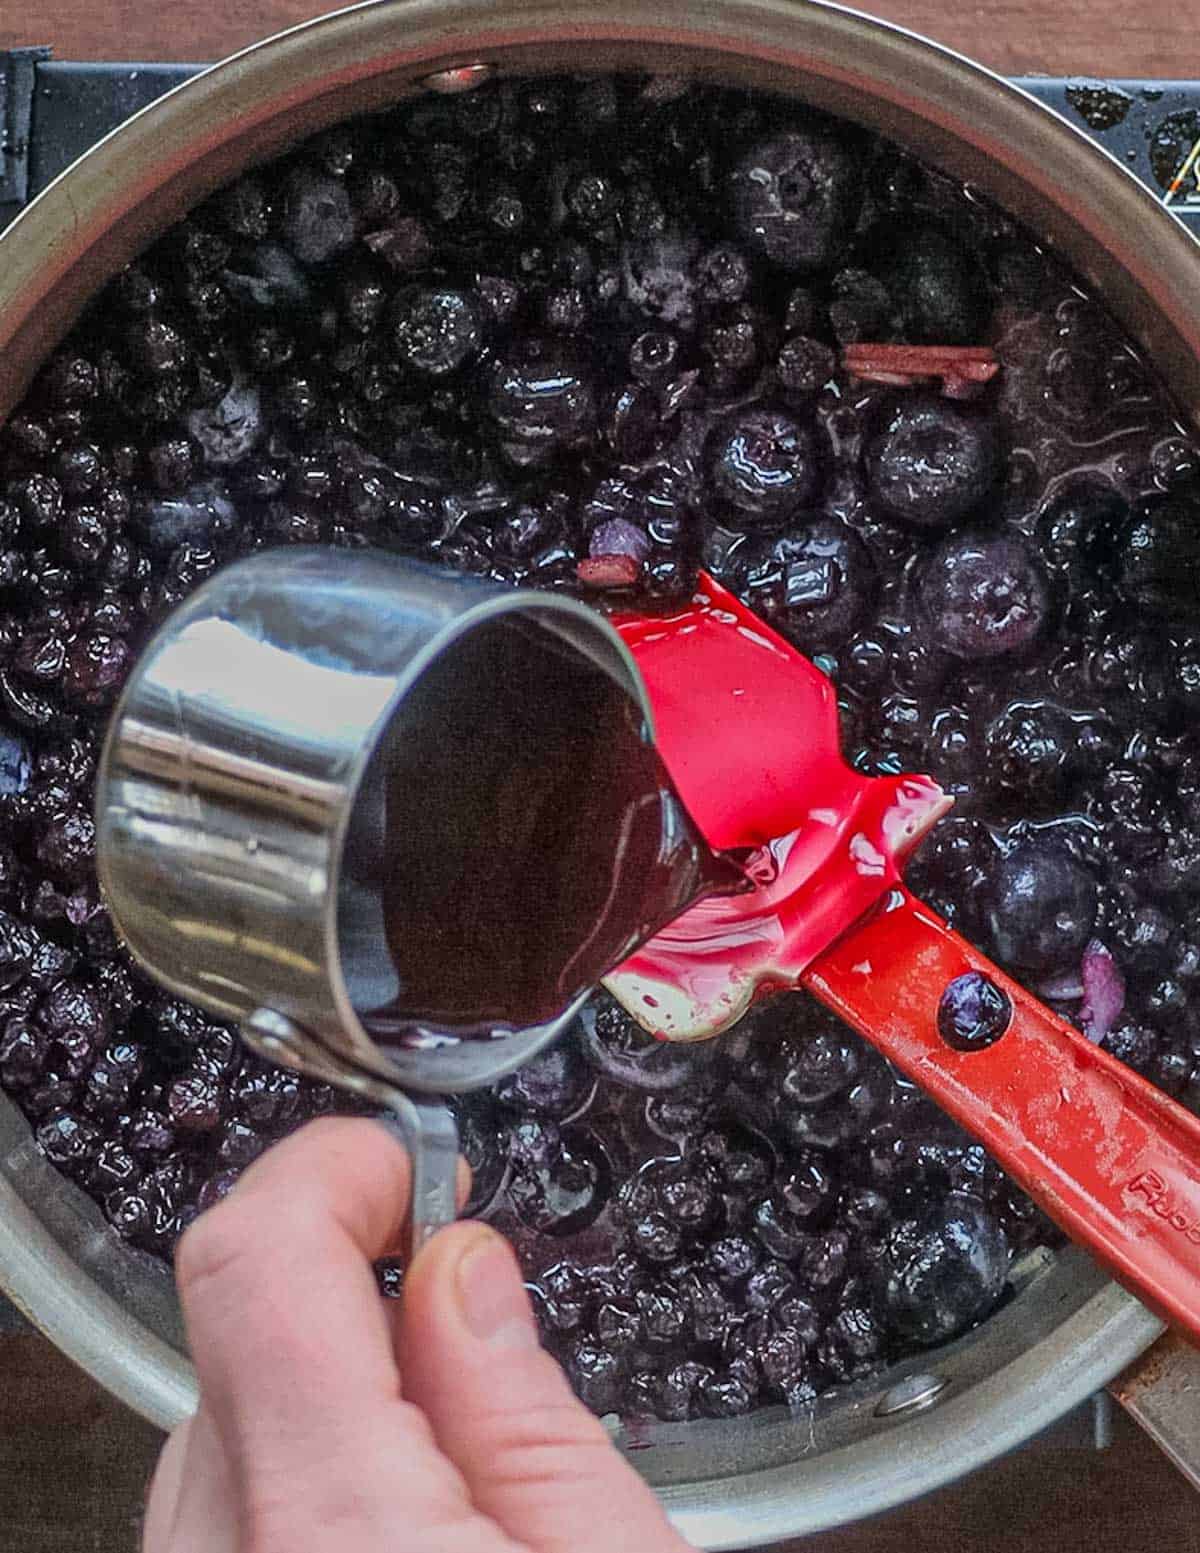 Adding blueberry vinegar to a pan of cooking blueberry sauce.